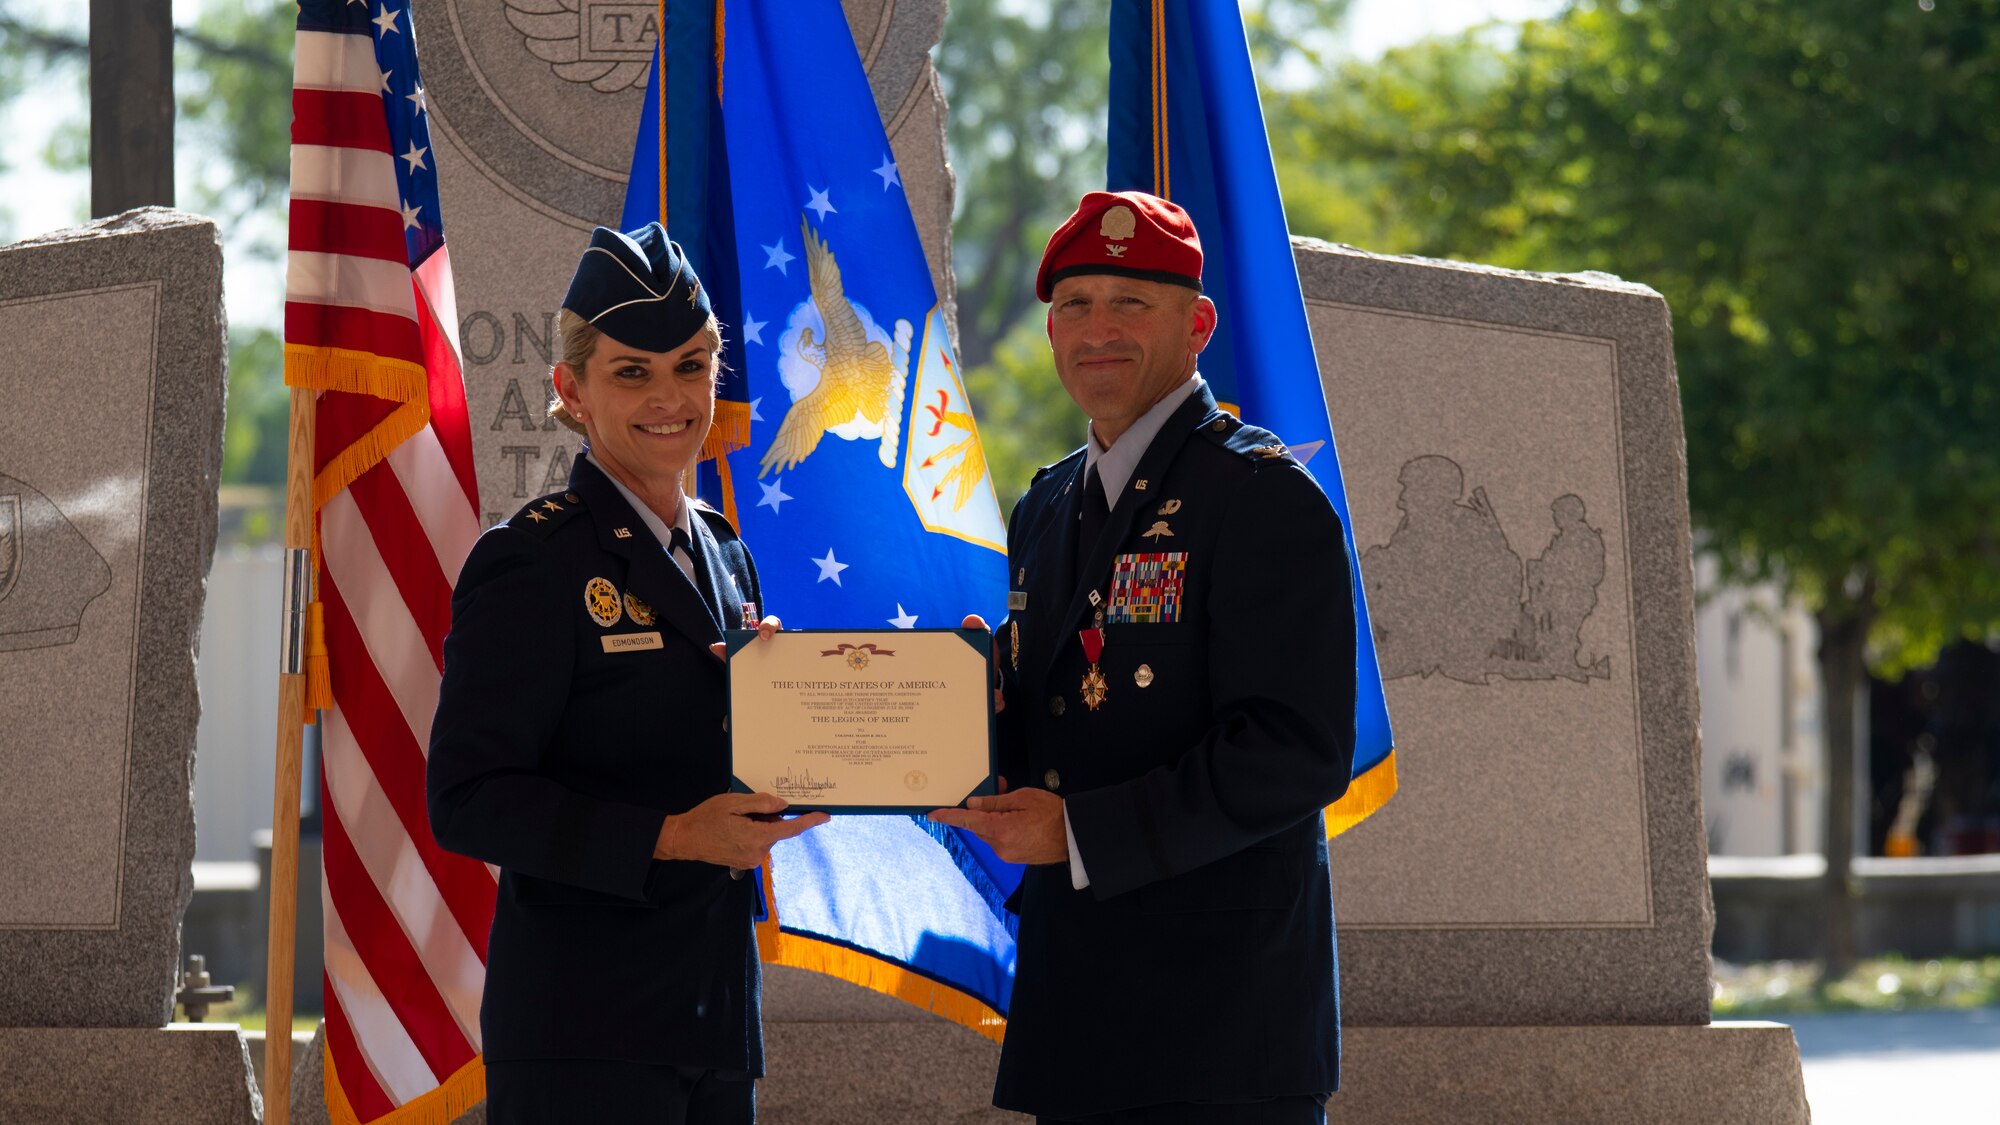 U.S. Air Force Maj. Gen. Michele Edmondson (left), 2nd Air Force commander and presiding officer, presents the Legion of Merit to Col. Mason Dula (right), outgoing Special Warfare Training Wing commander during the SWTW change of command ceremony at Joint Base San Antonio-Chapman Training Annex, Texas, July 11, 2022.